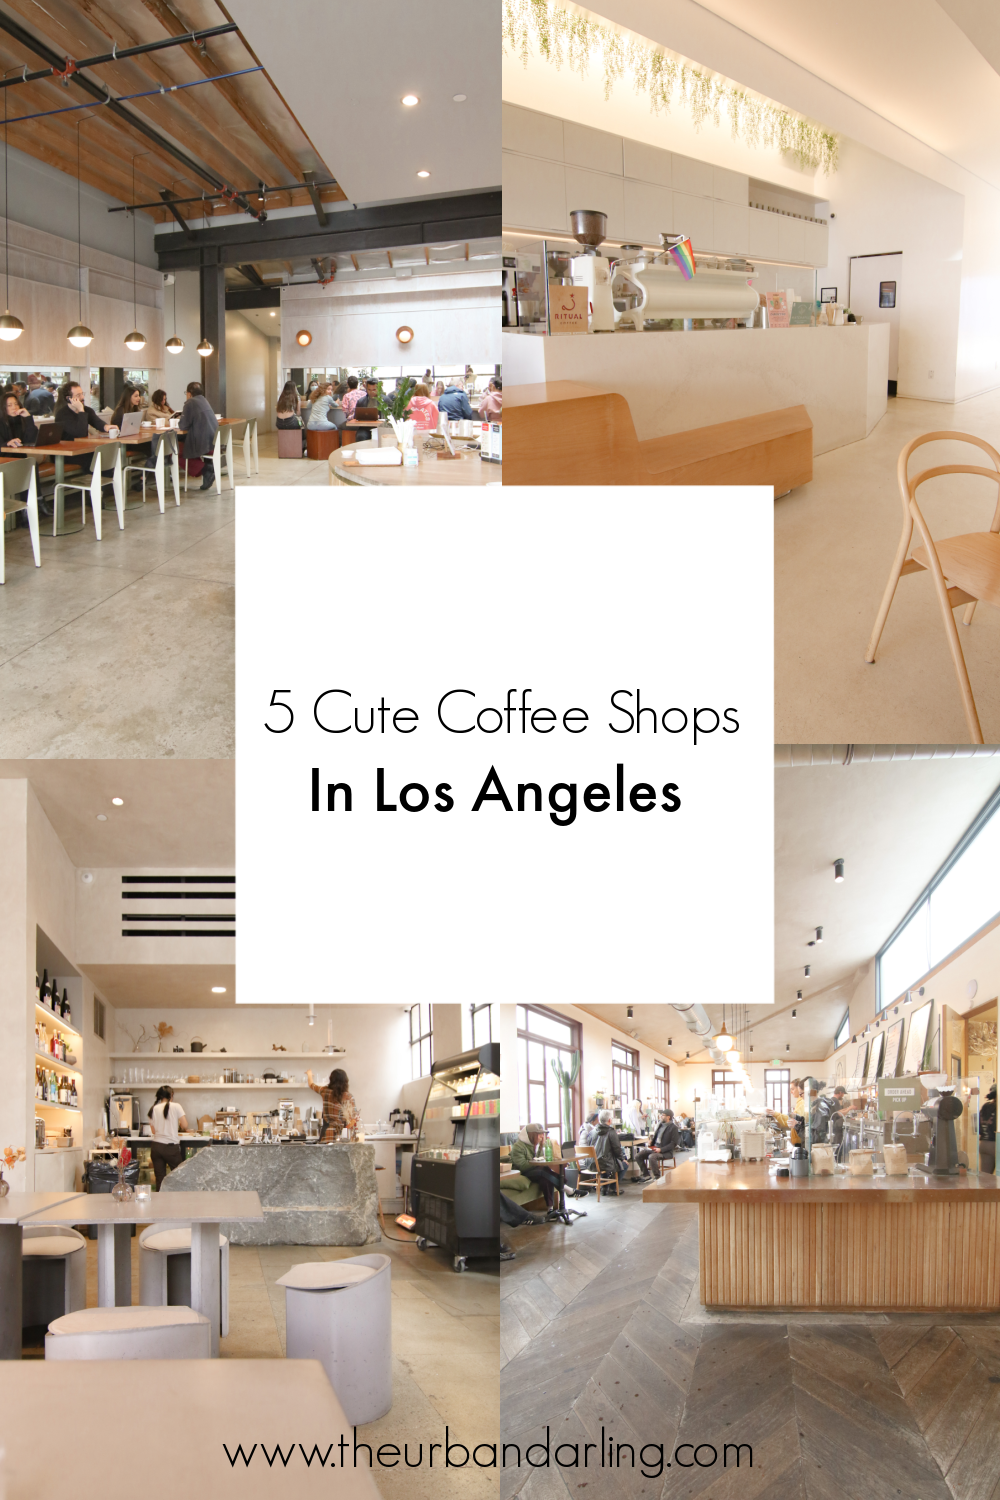 https://theurbandarling.com/wp-content/uploads/2023/05/5-Cute-Coffee-Shops-In-Los-Angeles-1.png